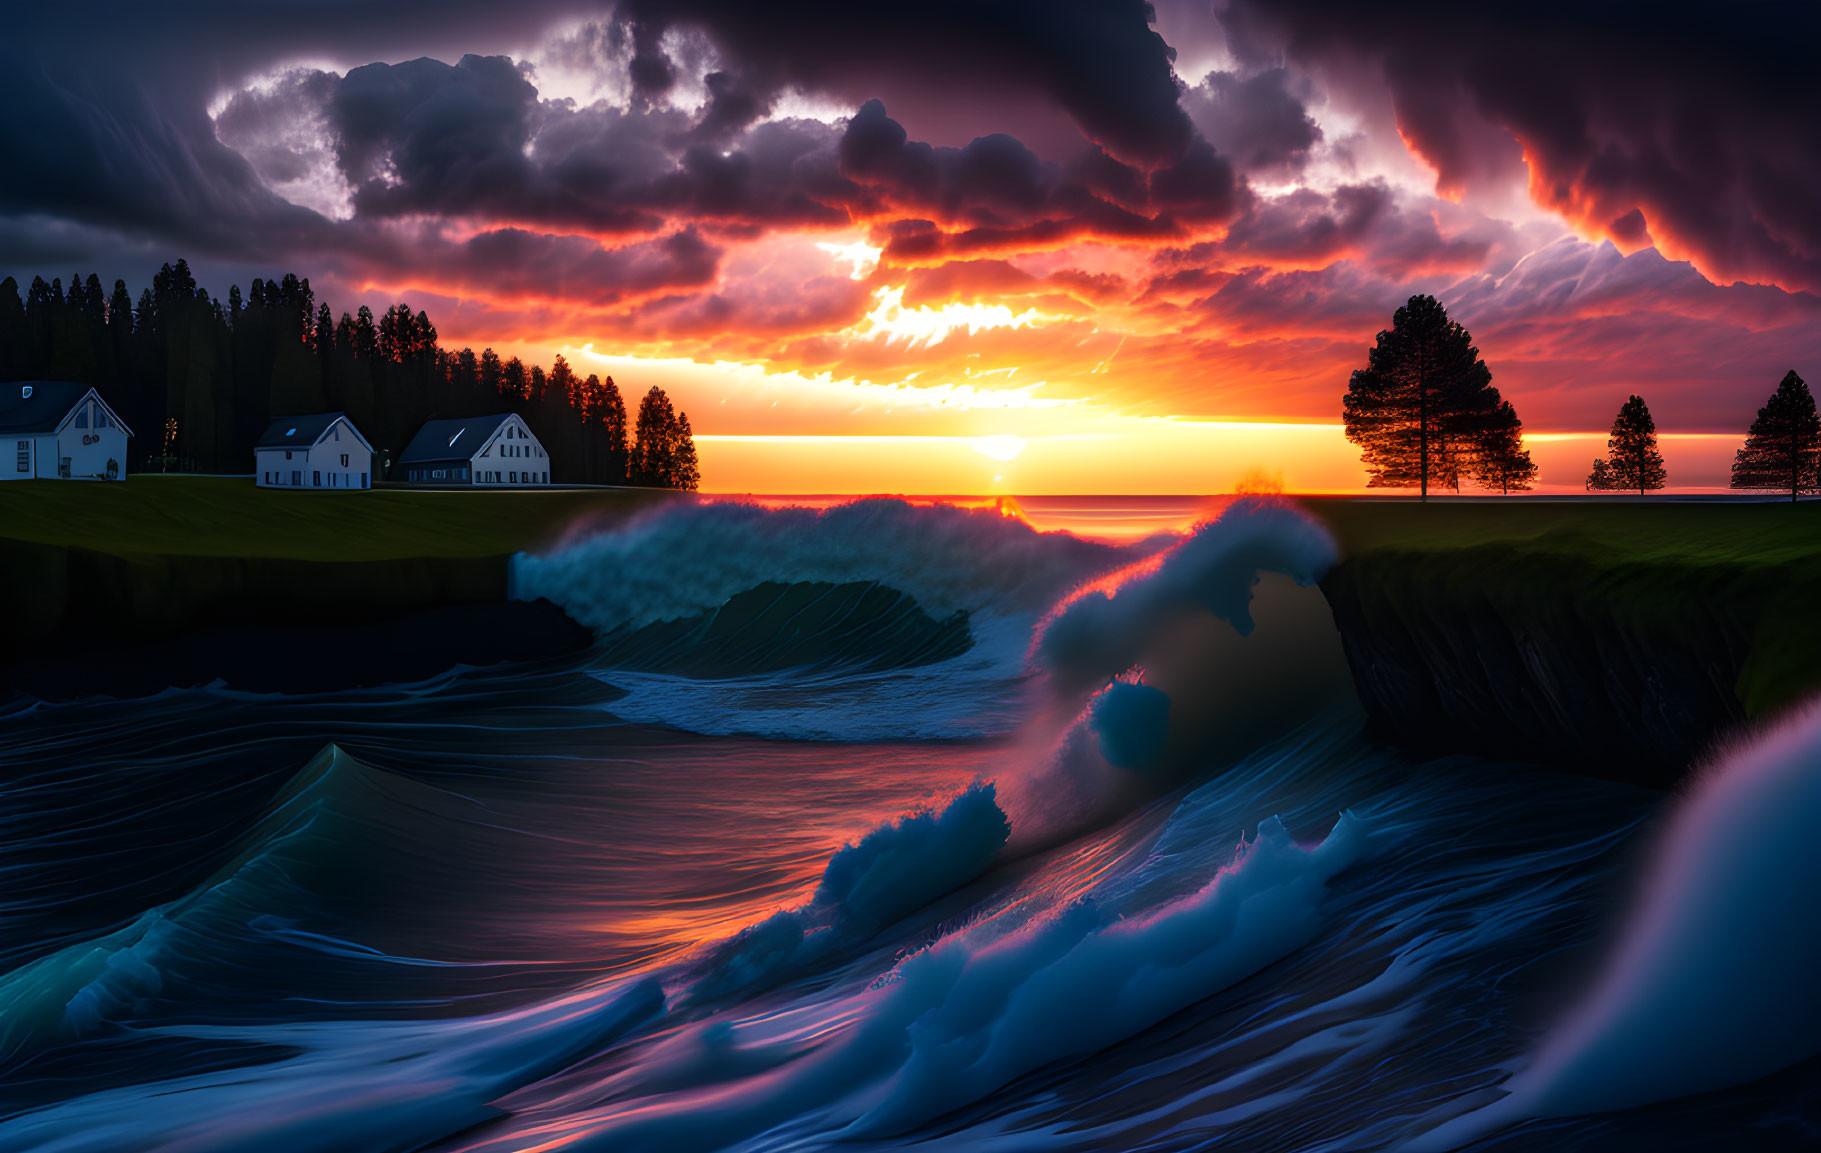 Vivid coastal sunset with dramatic clouds and curling waves